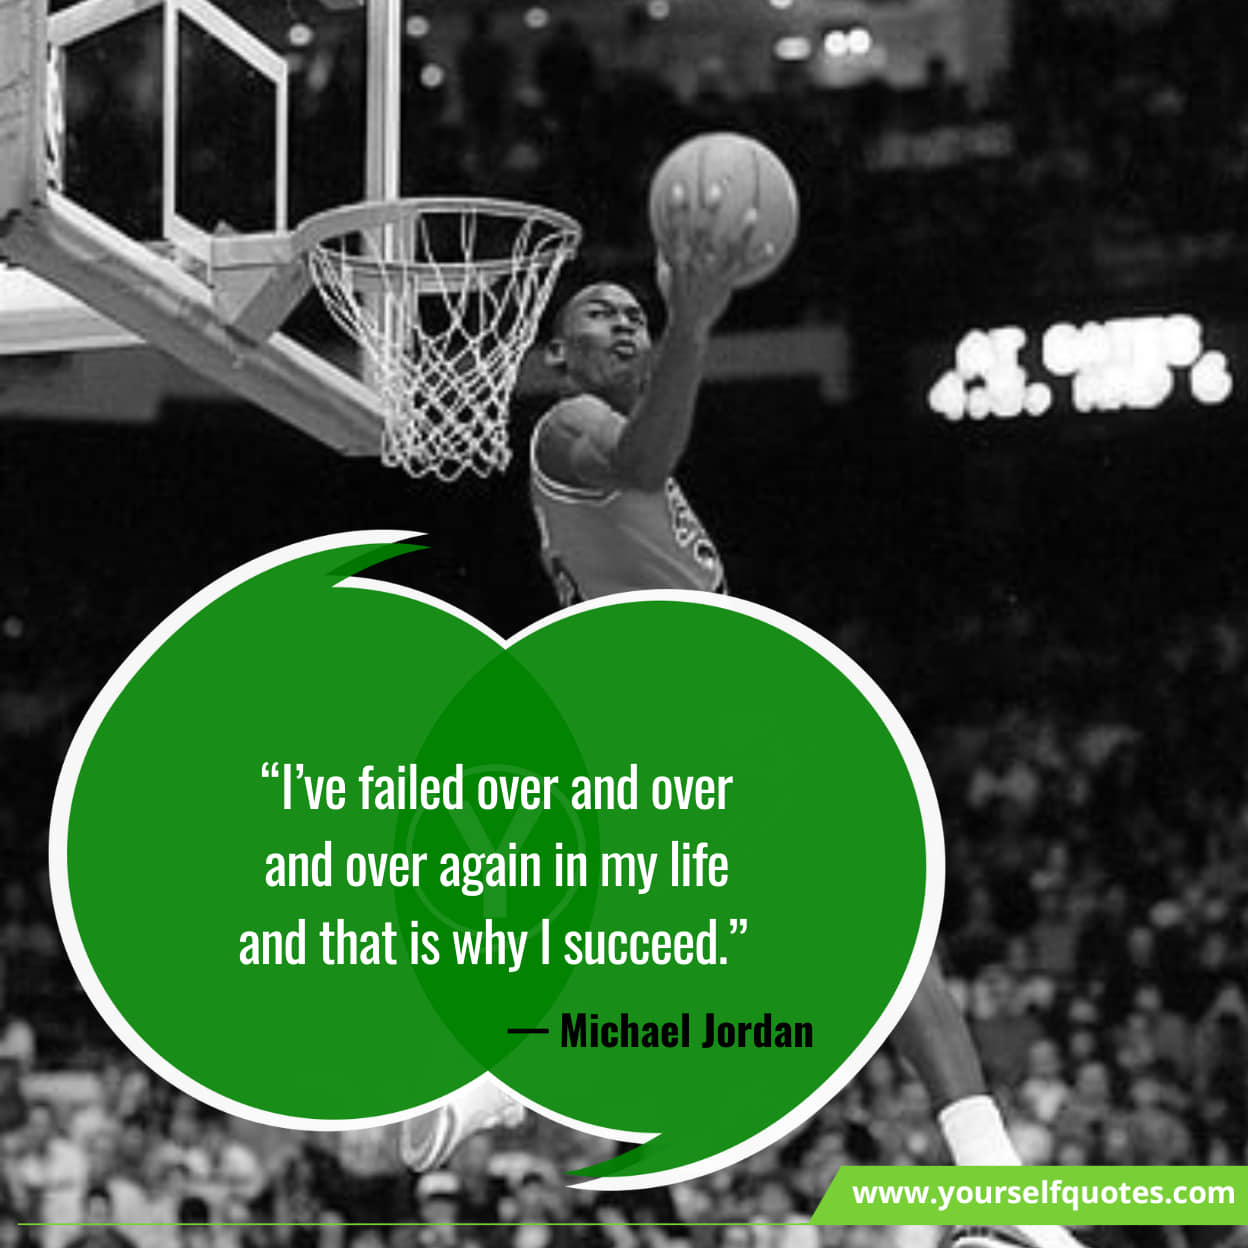 Determination and hard work quotes by Michael Jordan